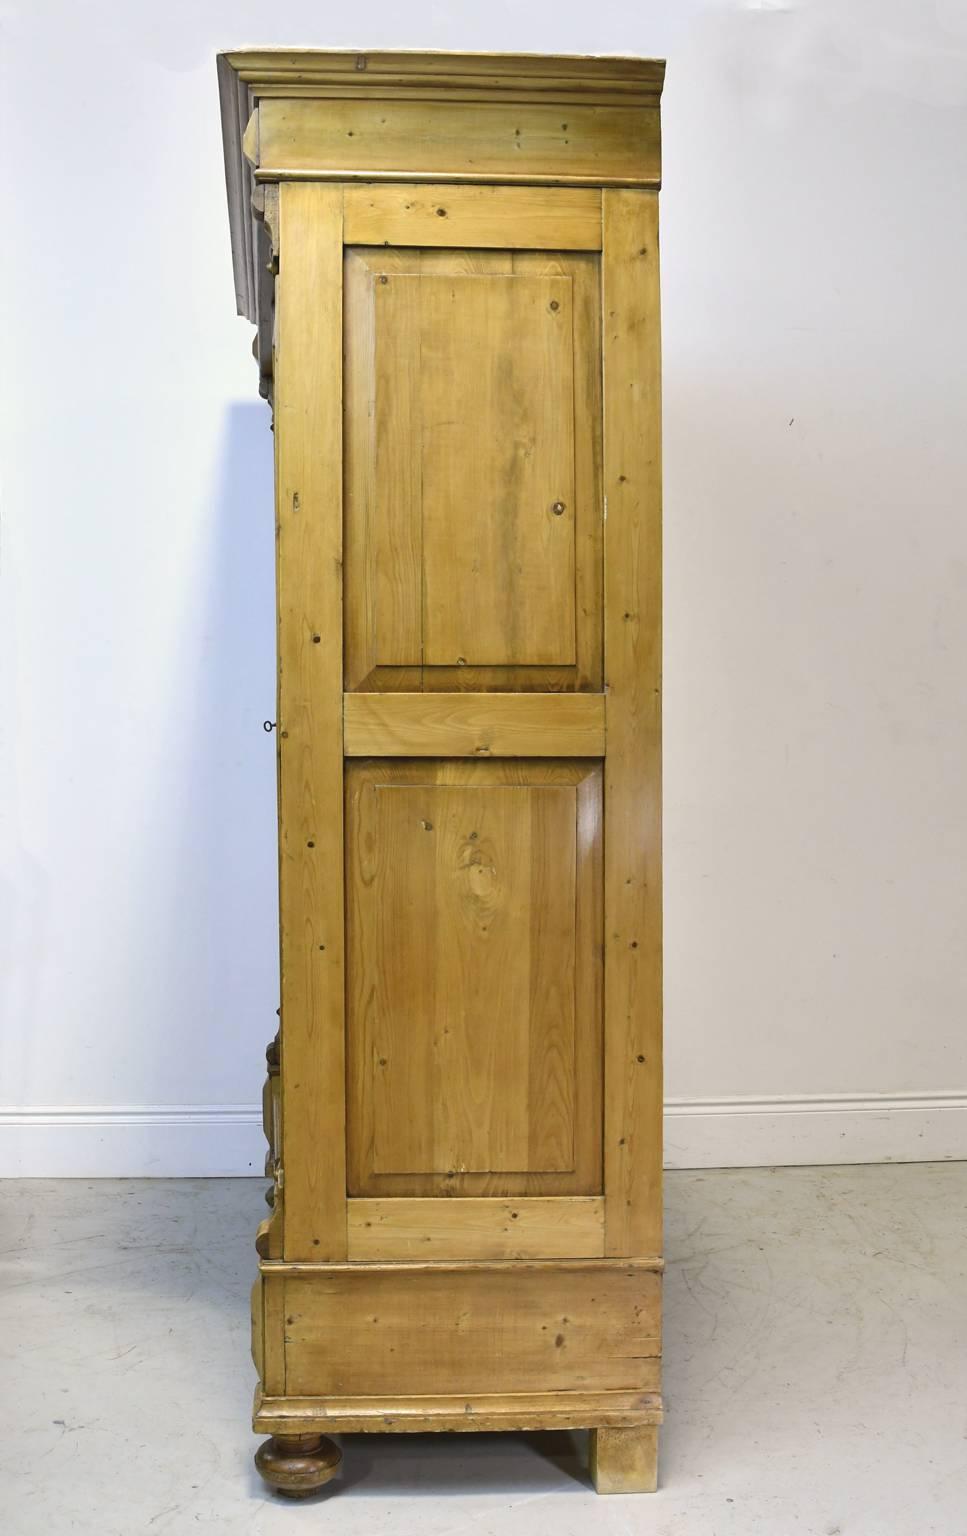 Carved 19th Century European Two-Door Armoire in Pine with Drawers & Interior Shelves